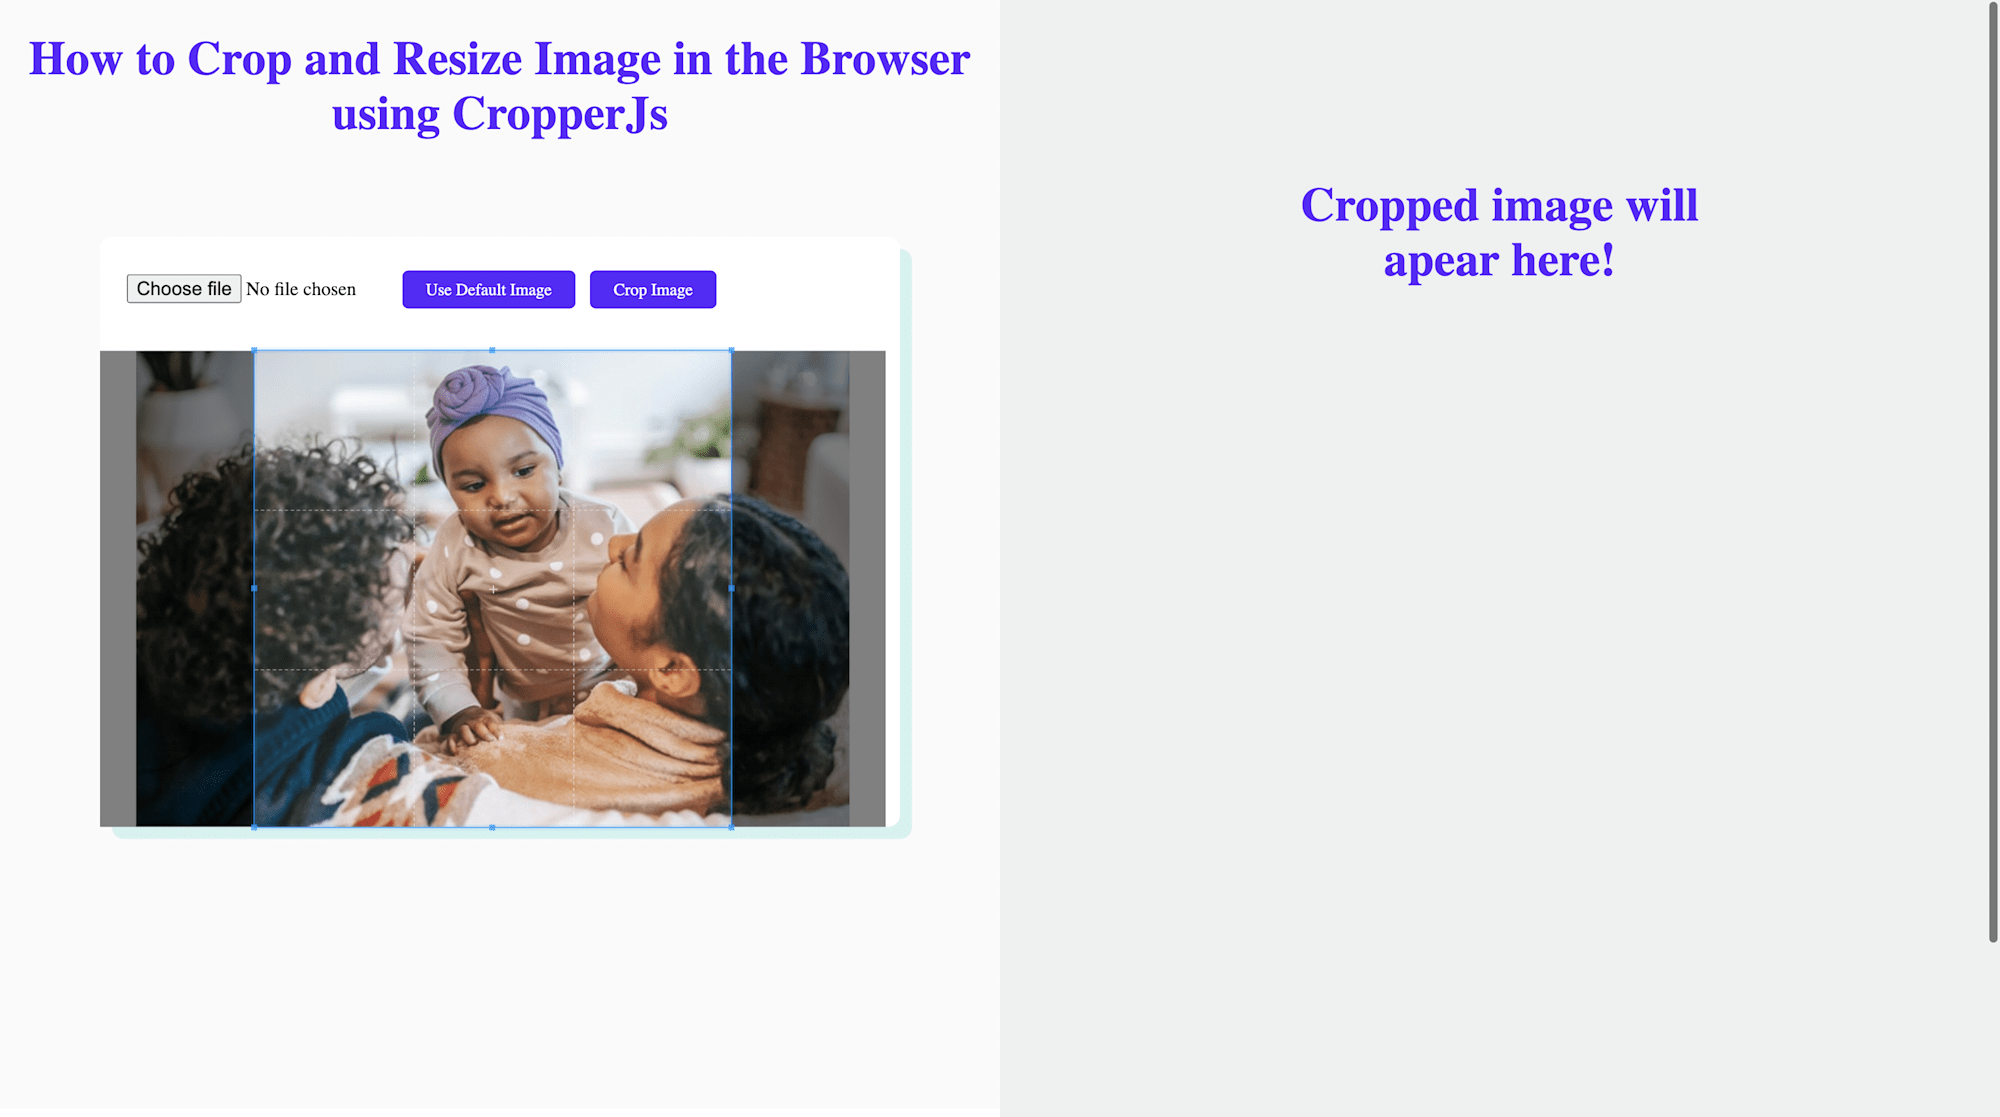 How to Crop and Resize Image in the Browser